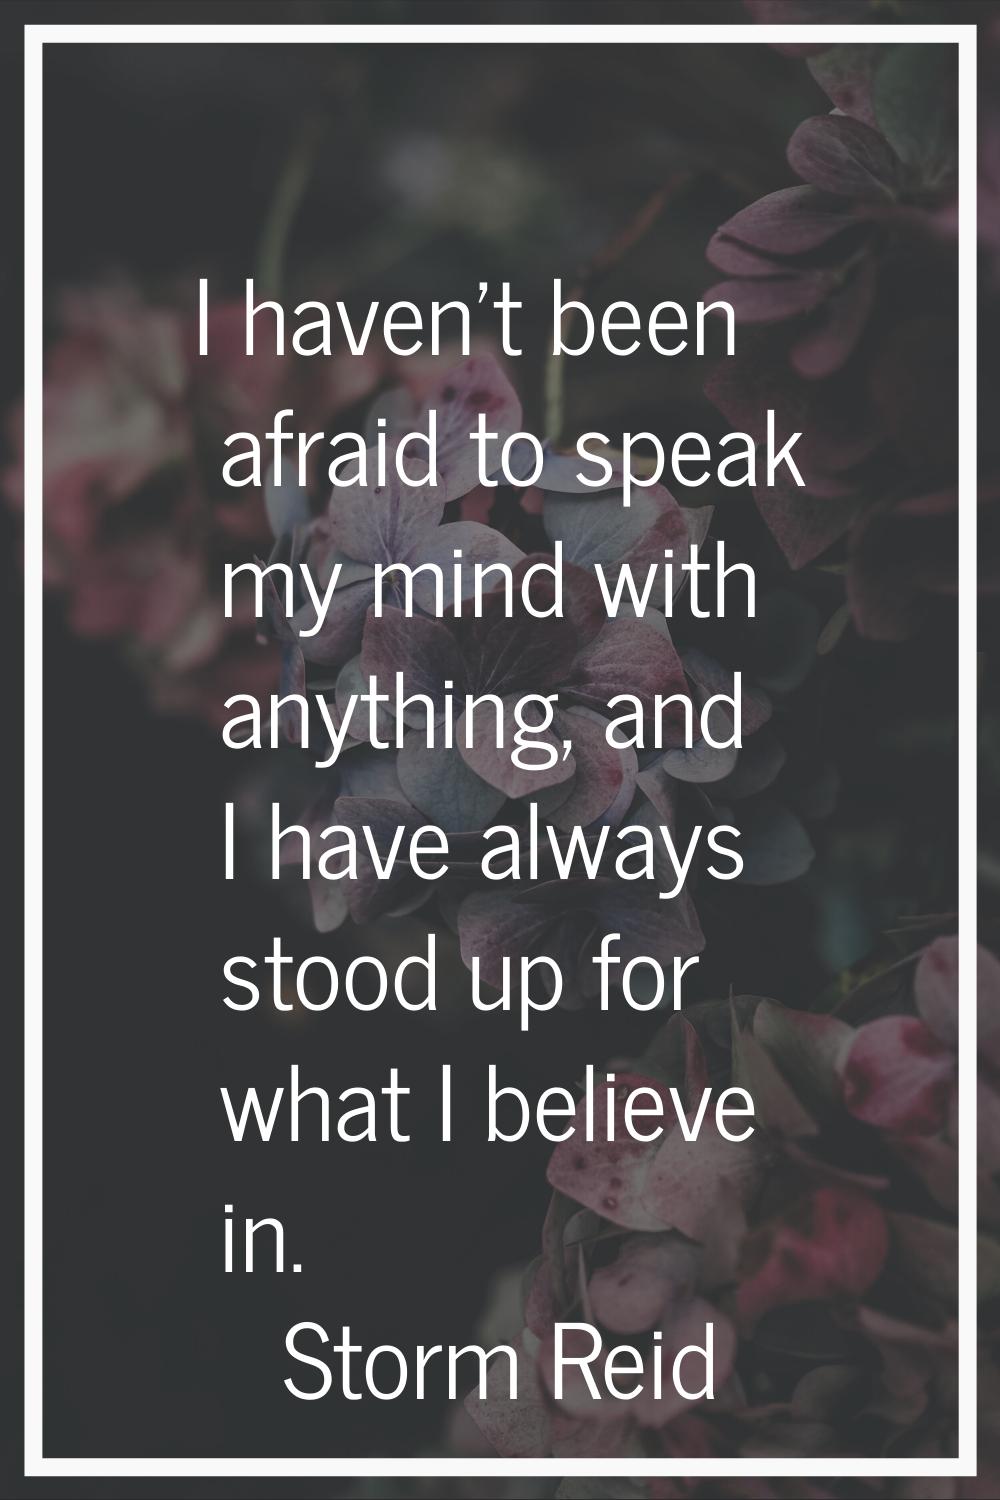 I haven't been afraid to speak my mind with anything, and I have always stood up for what I believe